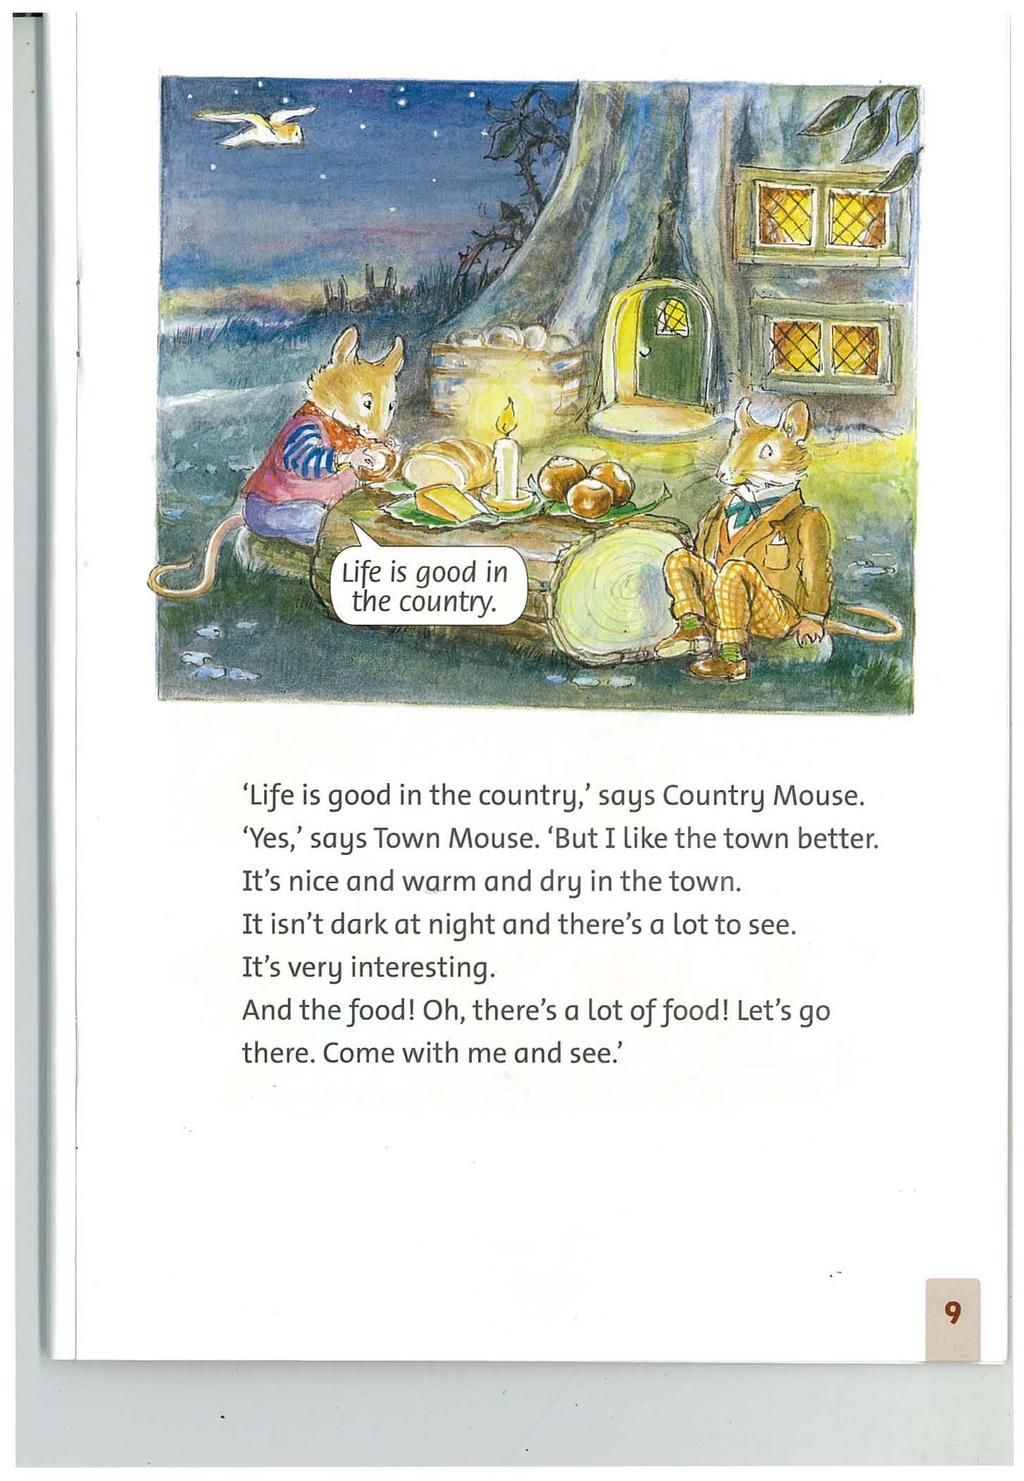 'Life is good in the country: says Country Mouse. 'Yes: says Town Mouse. 'But I like the town better. It's nice and warm and dry in the town.